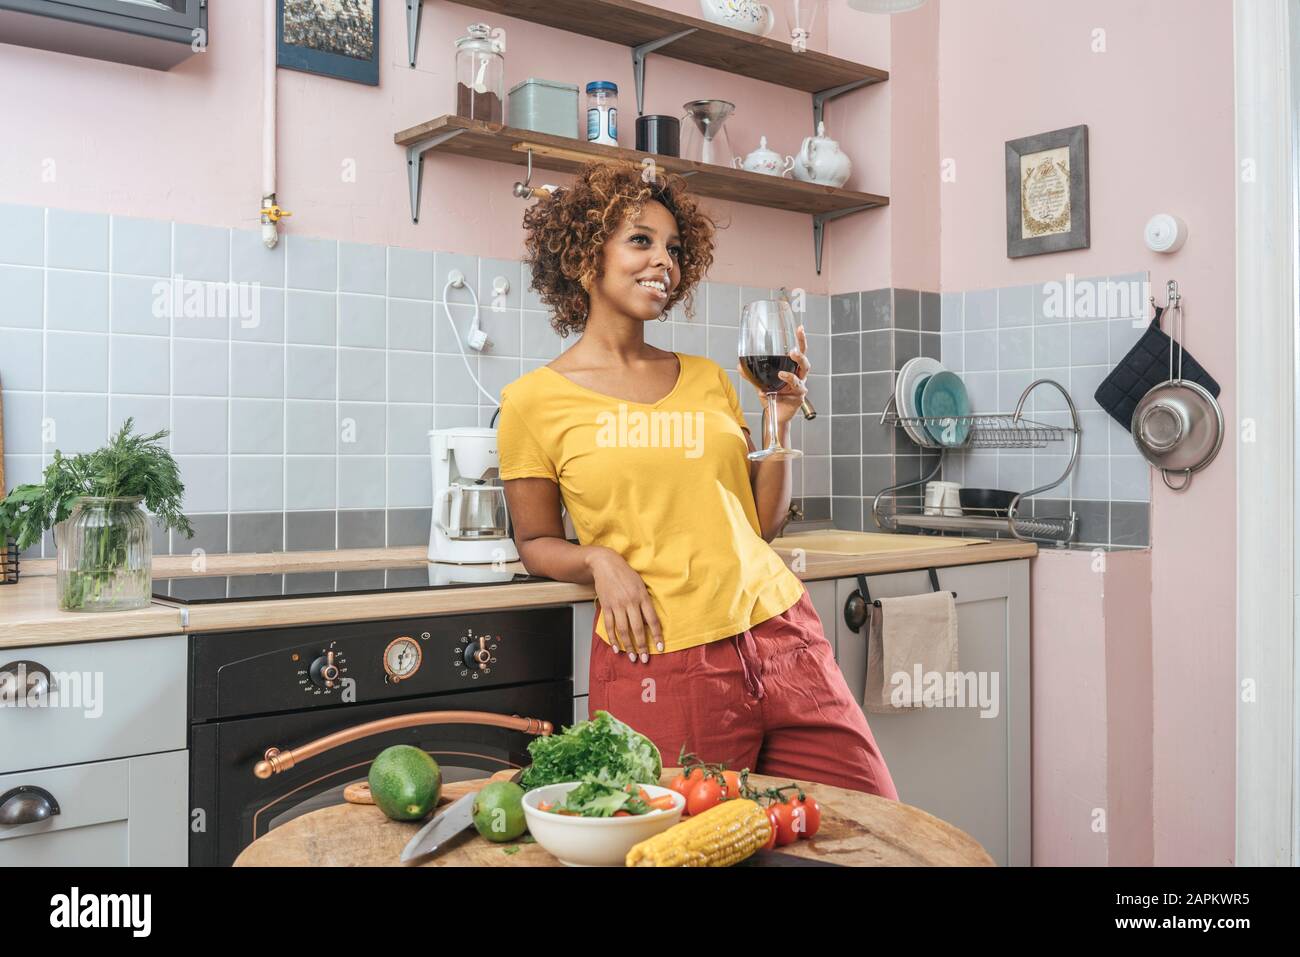 Smiling young woman drinking glass of red wine in kitchen Stock Photo